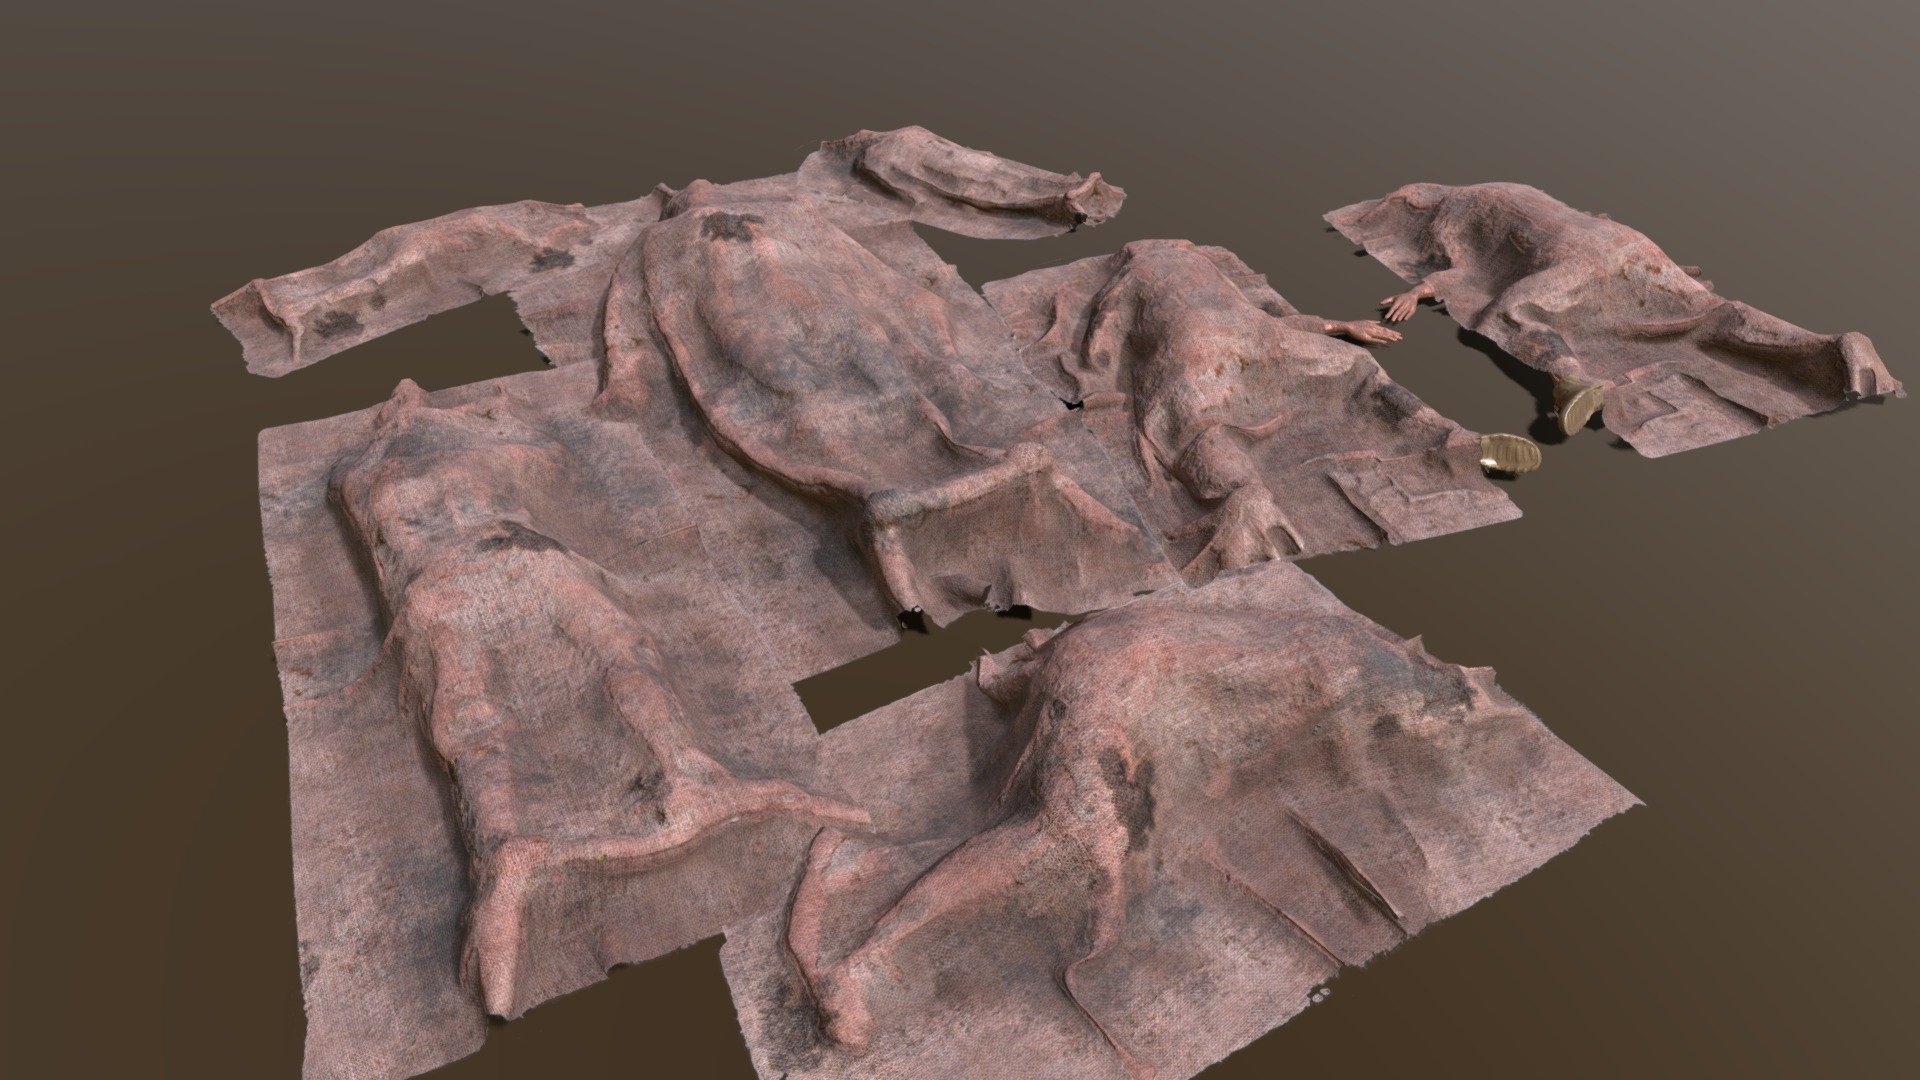 A bit of a creepier post from me here - a family of dead people from the plague.
This only includes the cover sheets 3d model